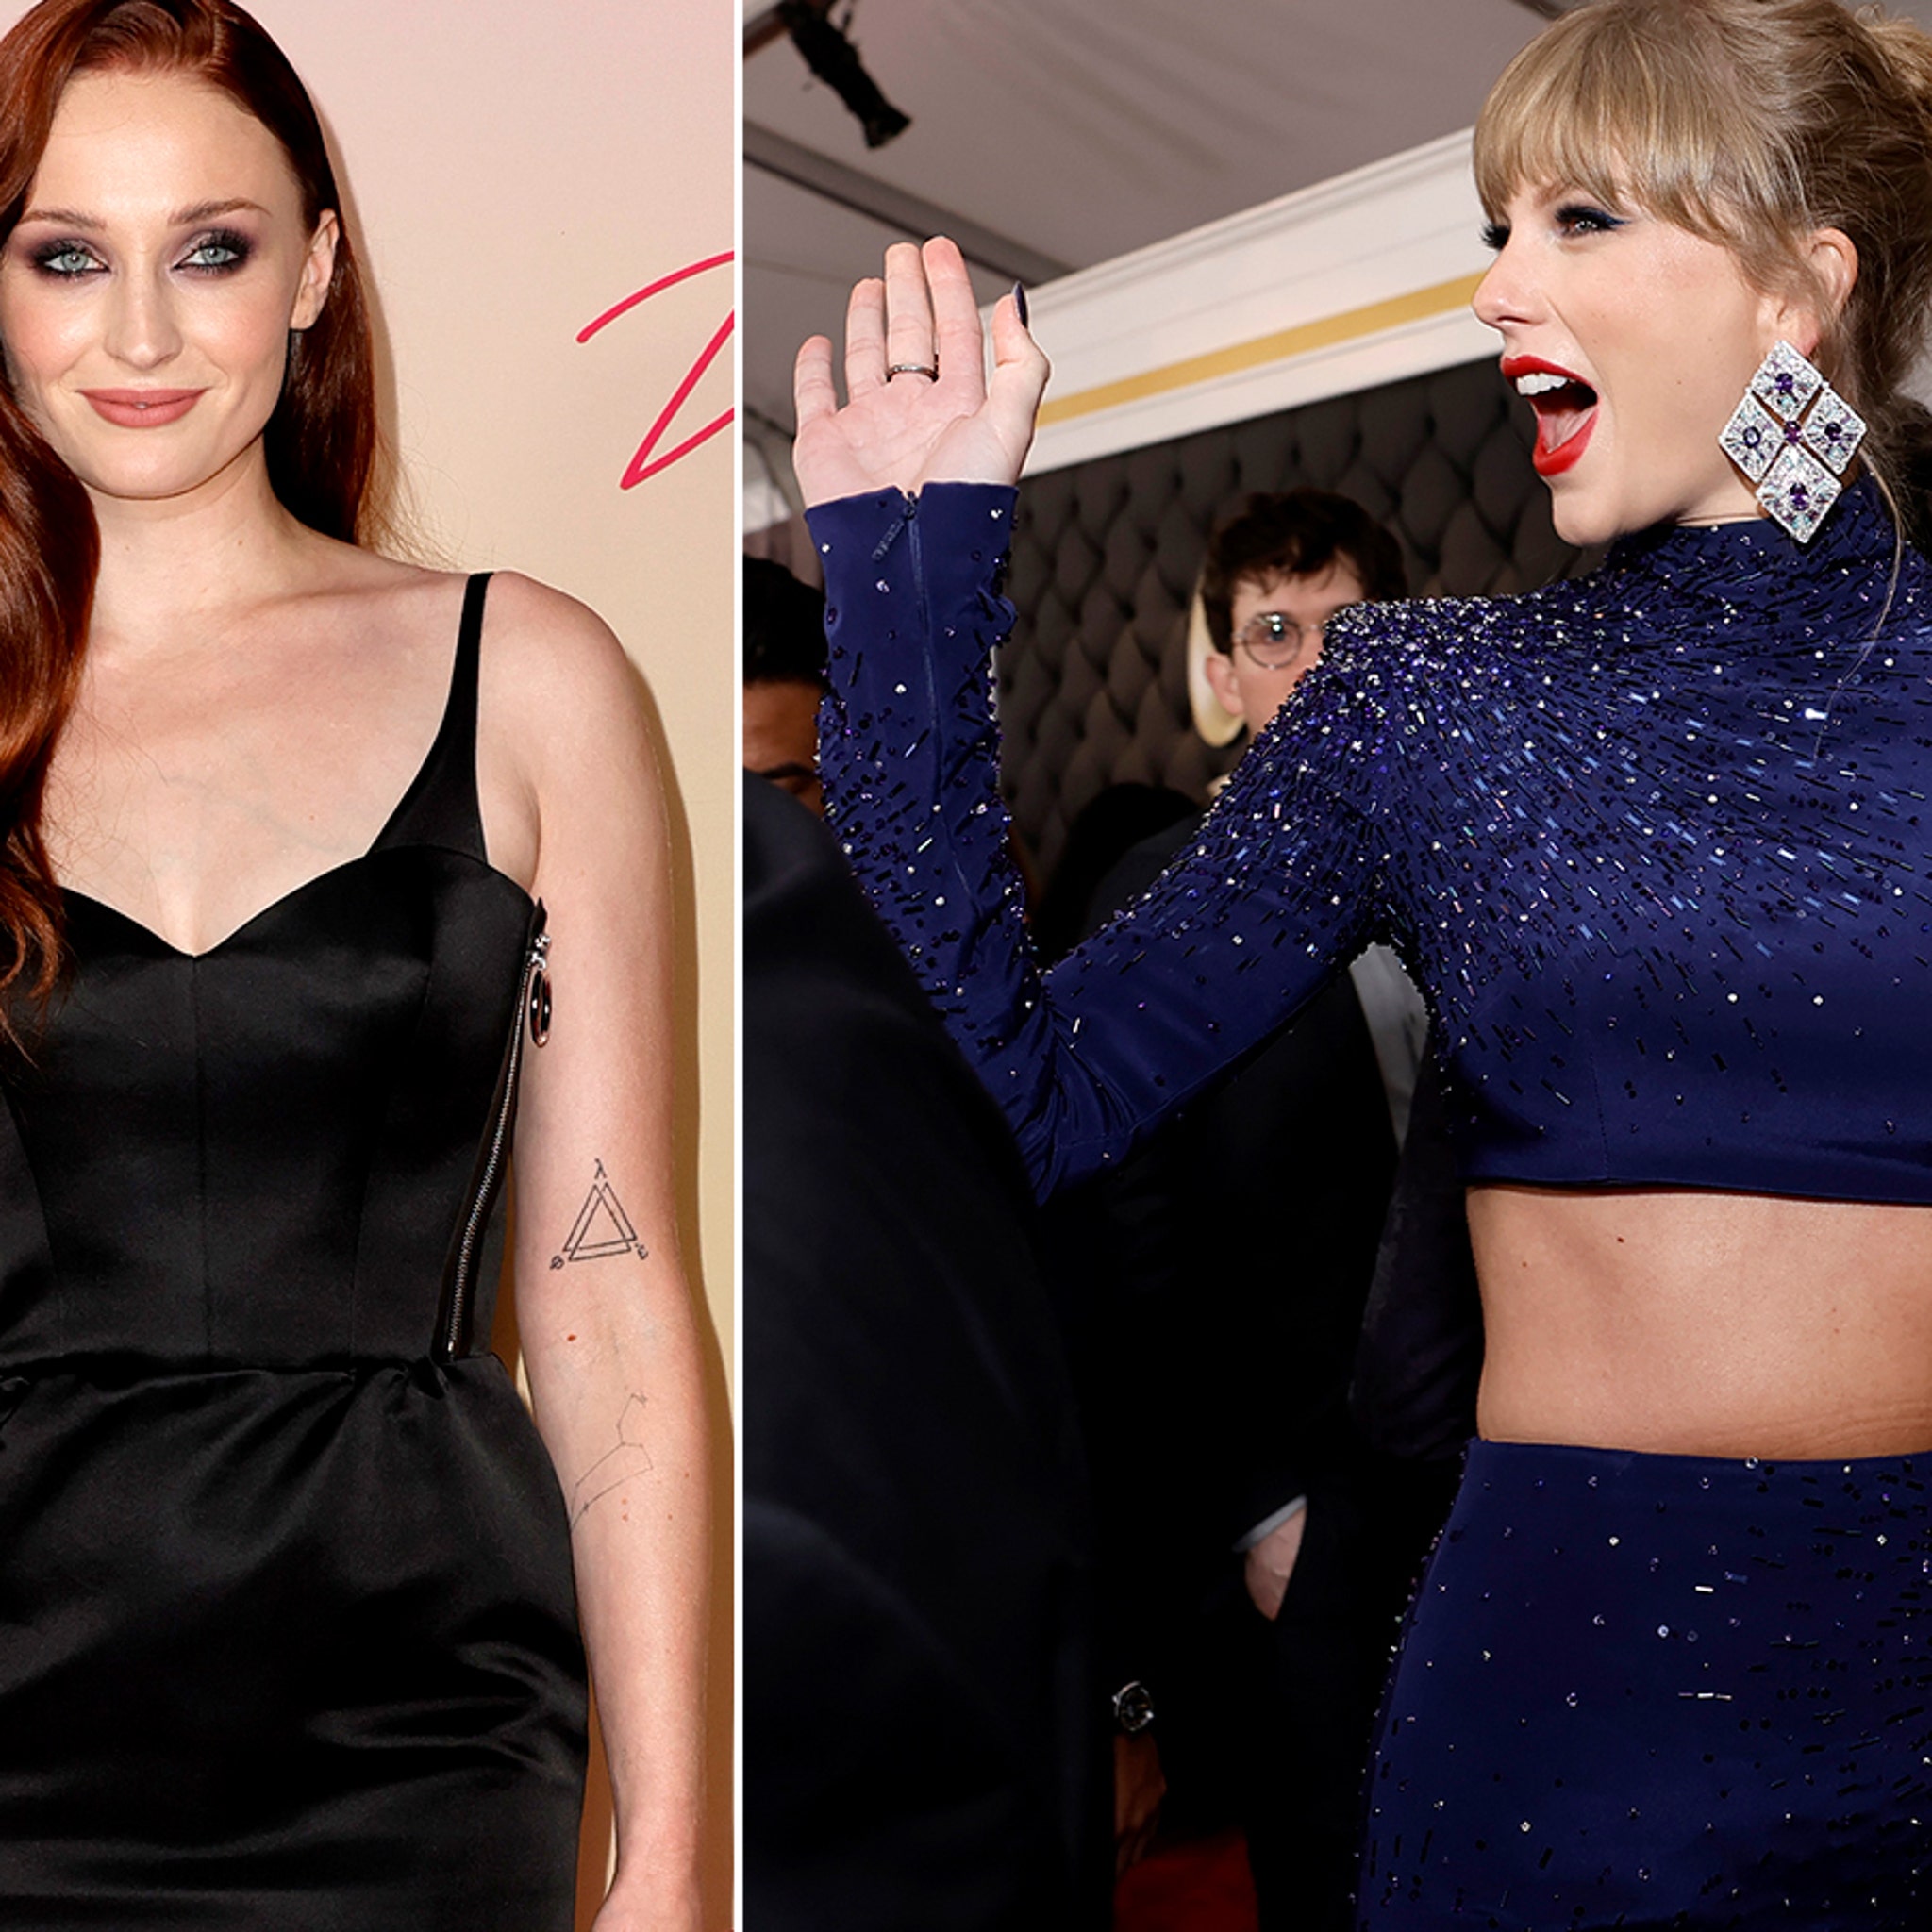 Sophie Turner Living in Taylor Swift's NYC Apartment During Joe Jonas Legal  Battle